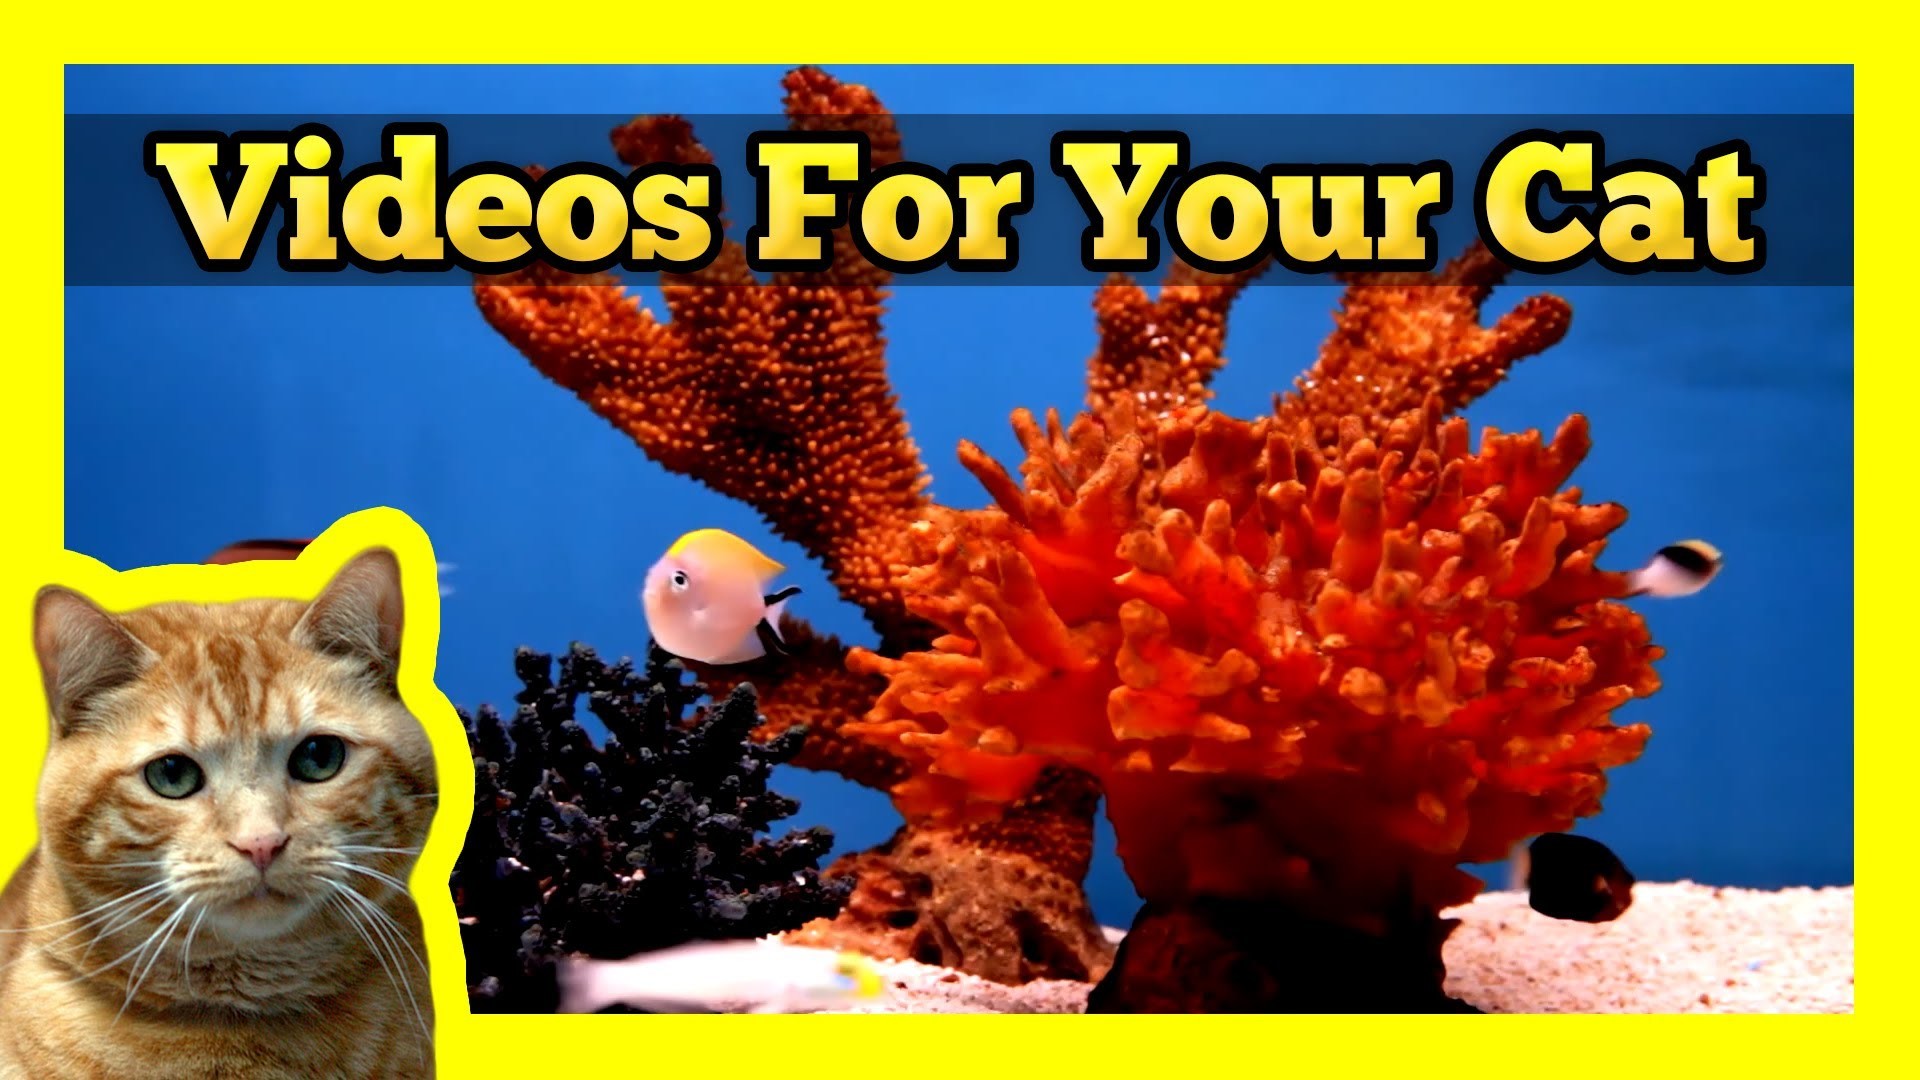 1920x1080 Videos for your Cat - Fish Tank (Trigger Fish, Yellow Wrasse, Domino  Damsel) - YouTube